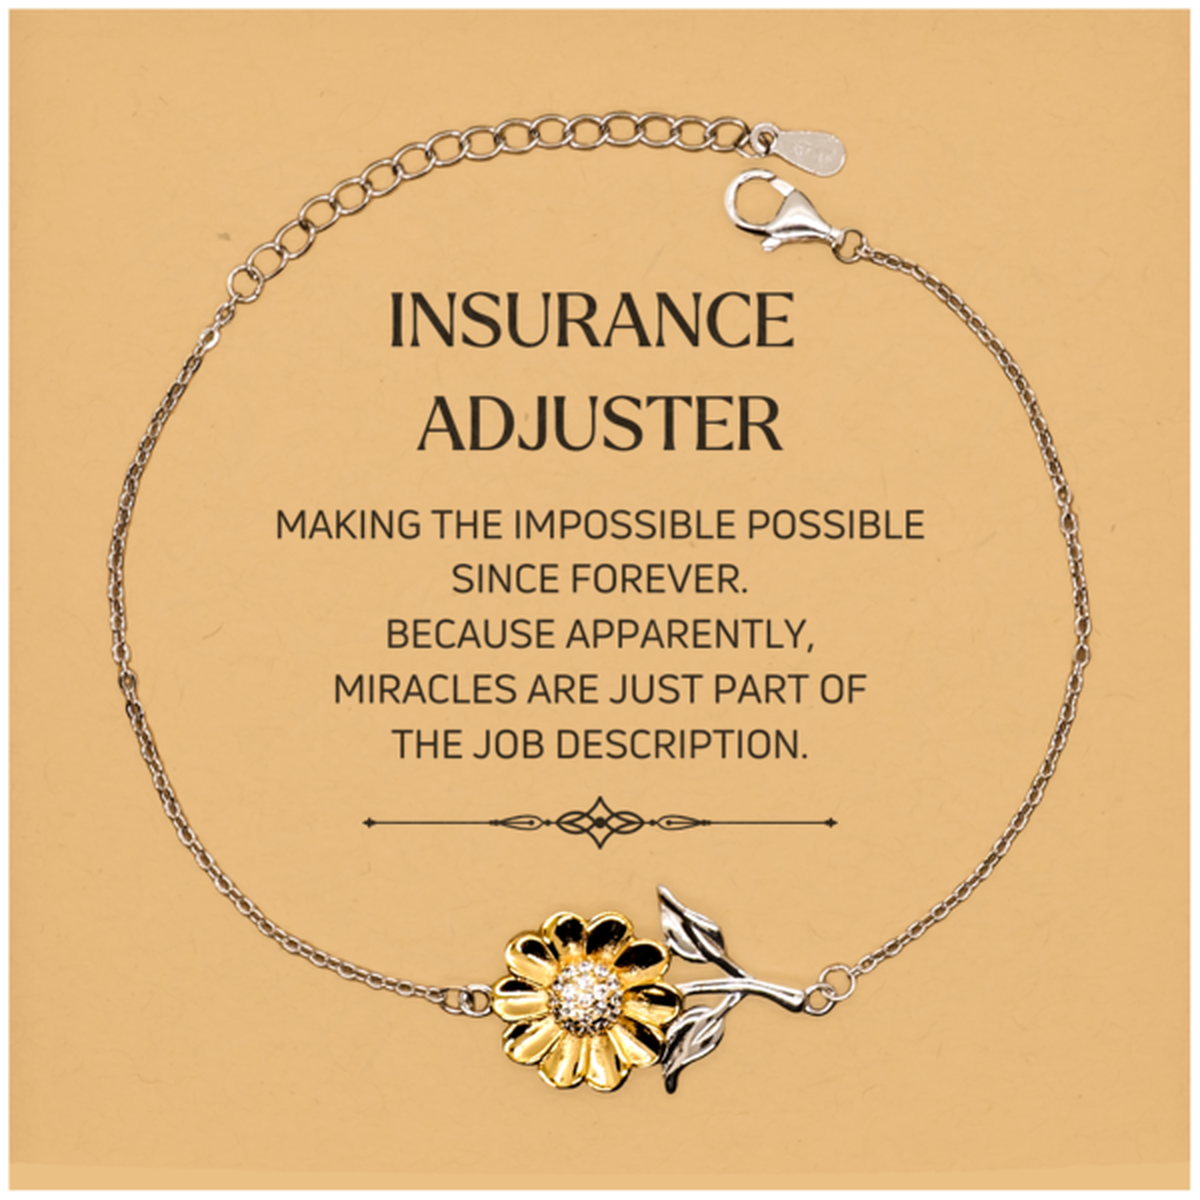 Funny Insurance Adjuster Gifts, Miracles are just part of the job description, Inspirational Birthday Christmas Sunflower Bracelet For Insurance Adjuster, Men, Women, Coworkers, Friends, Boss